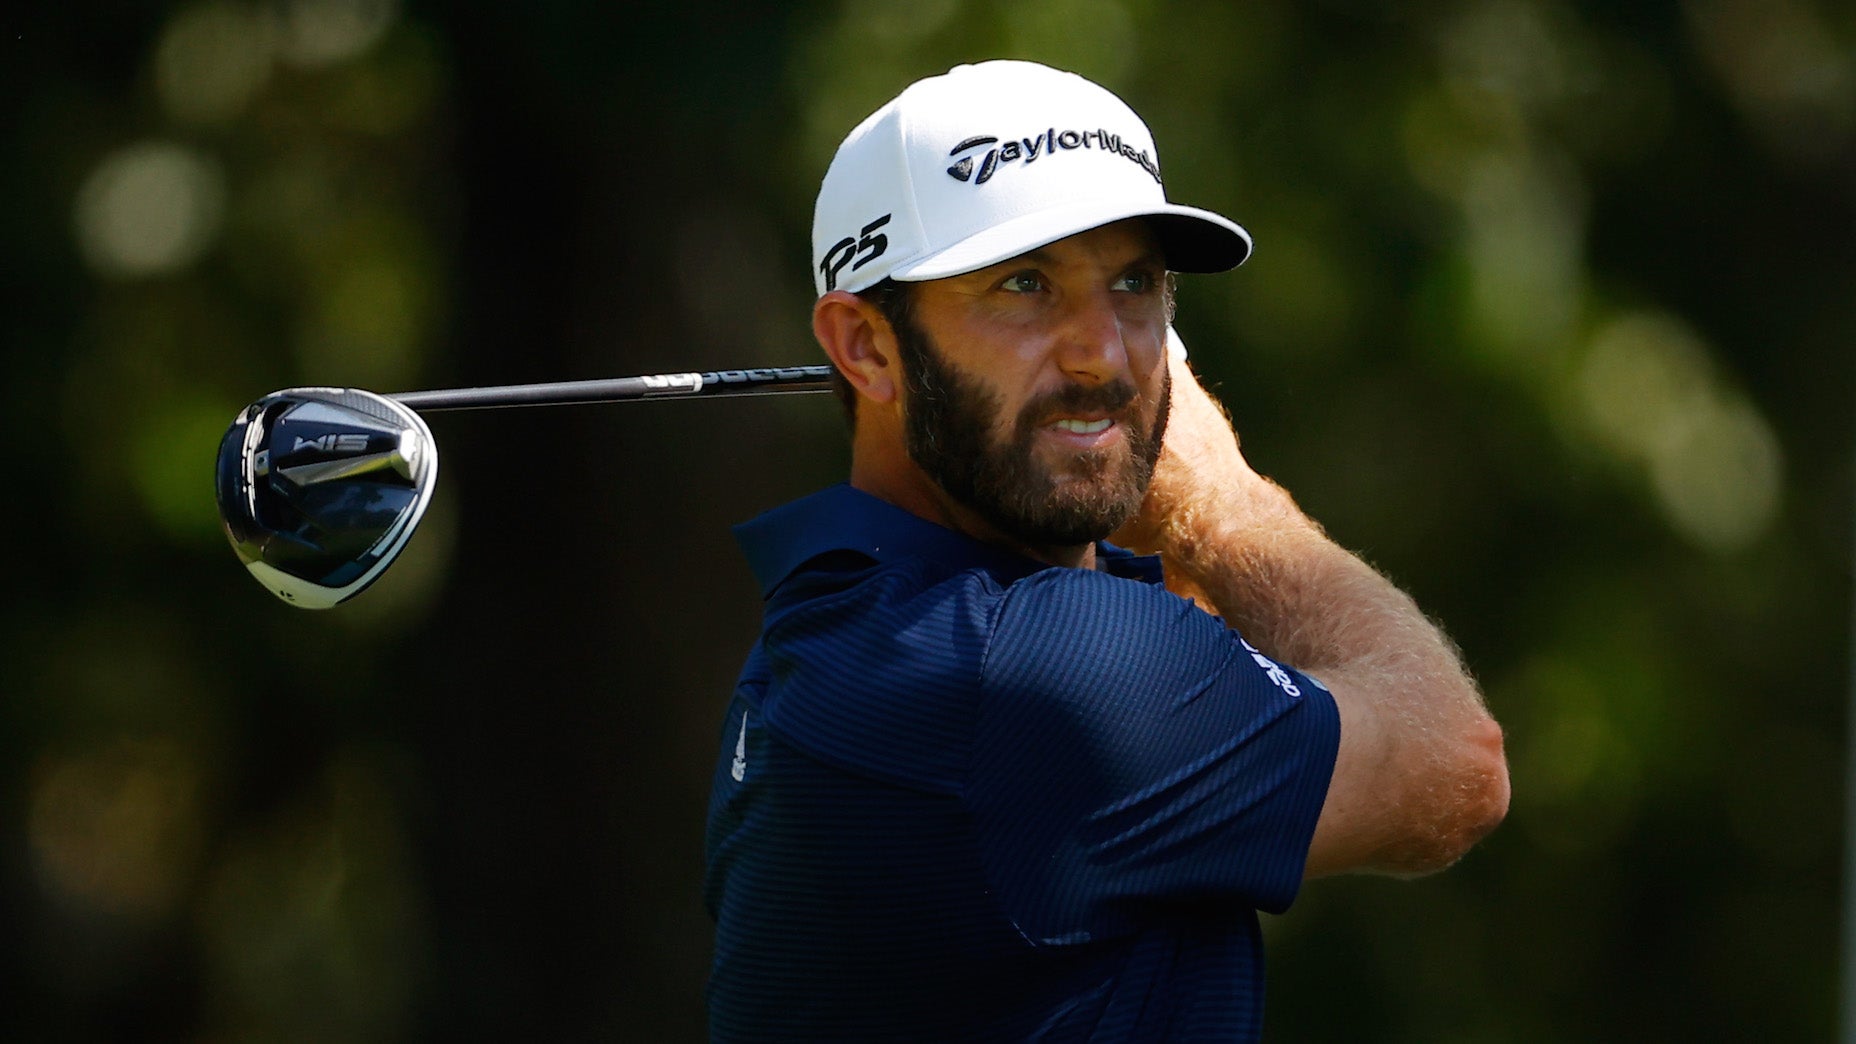 An in-depth look at Dustin Johnson's TaylorMade SIM driver setup